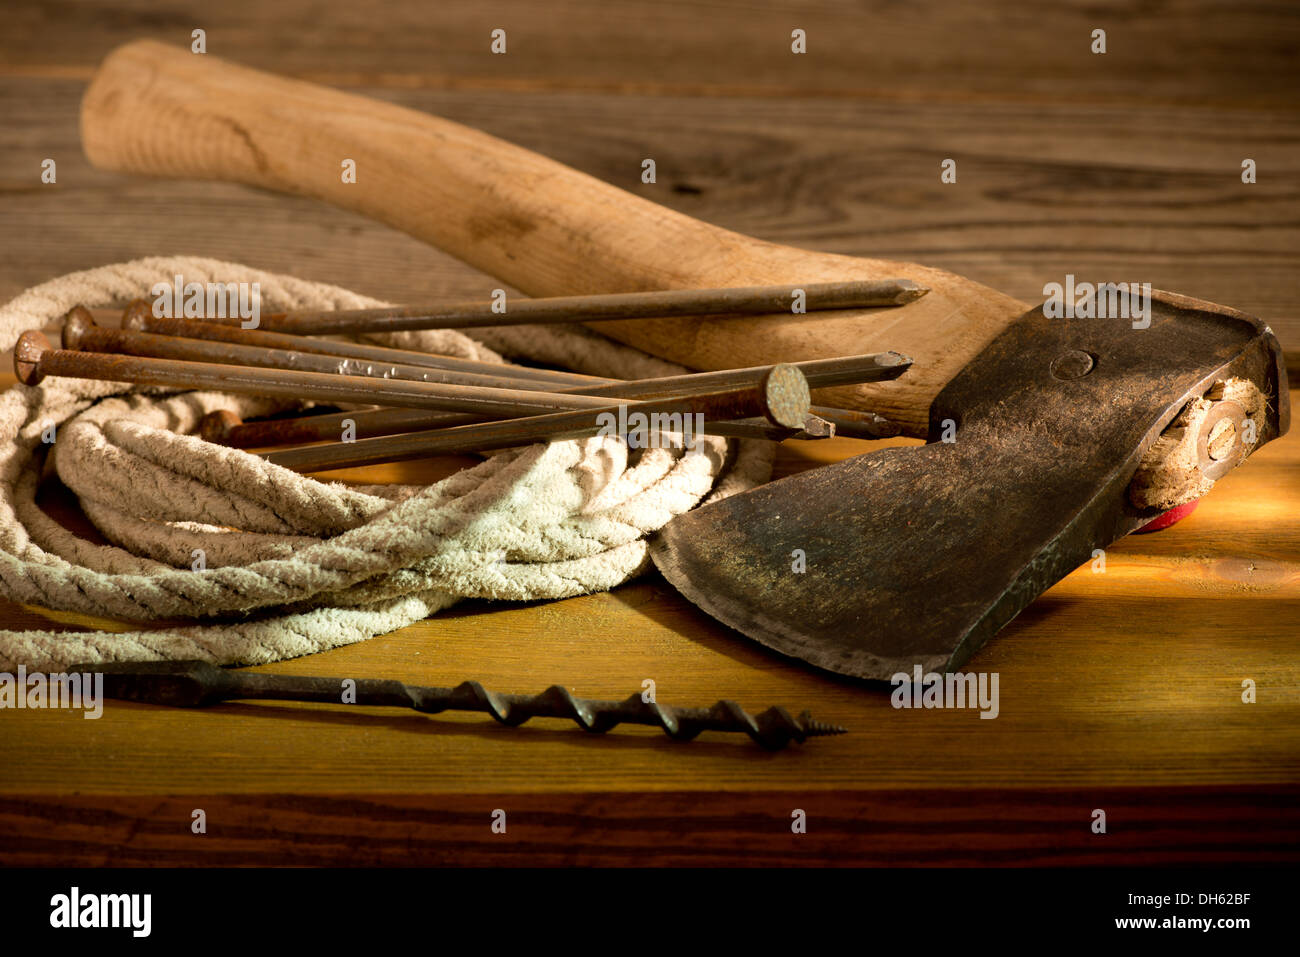 still life with a hatchet and old tools Stock Photo